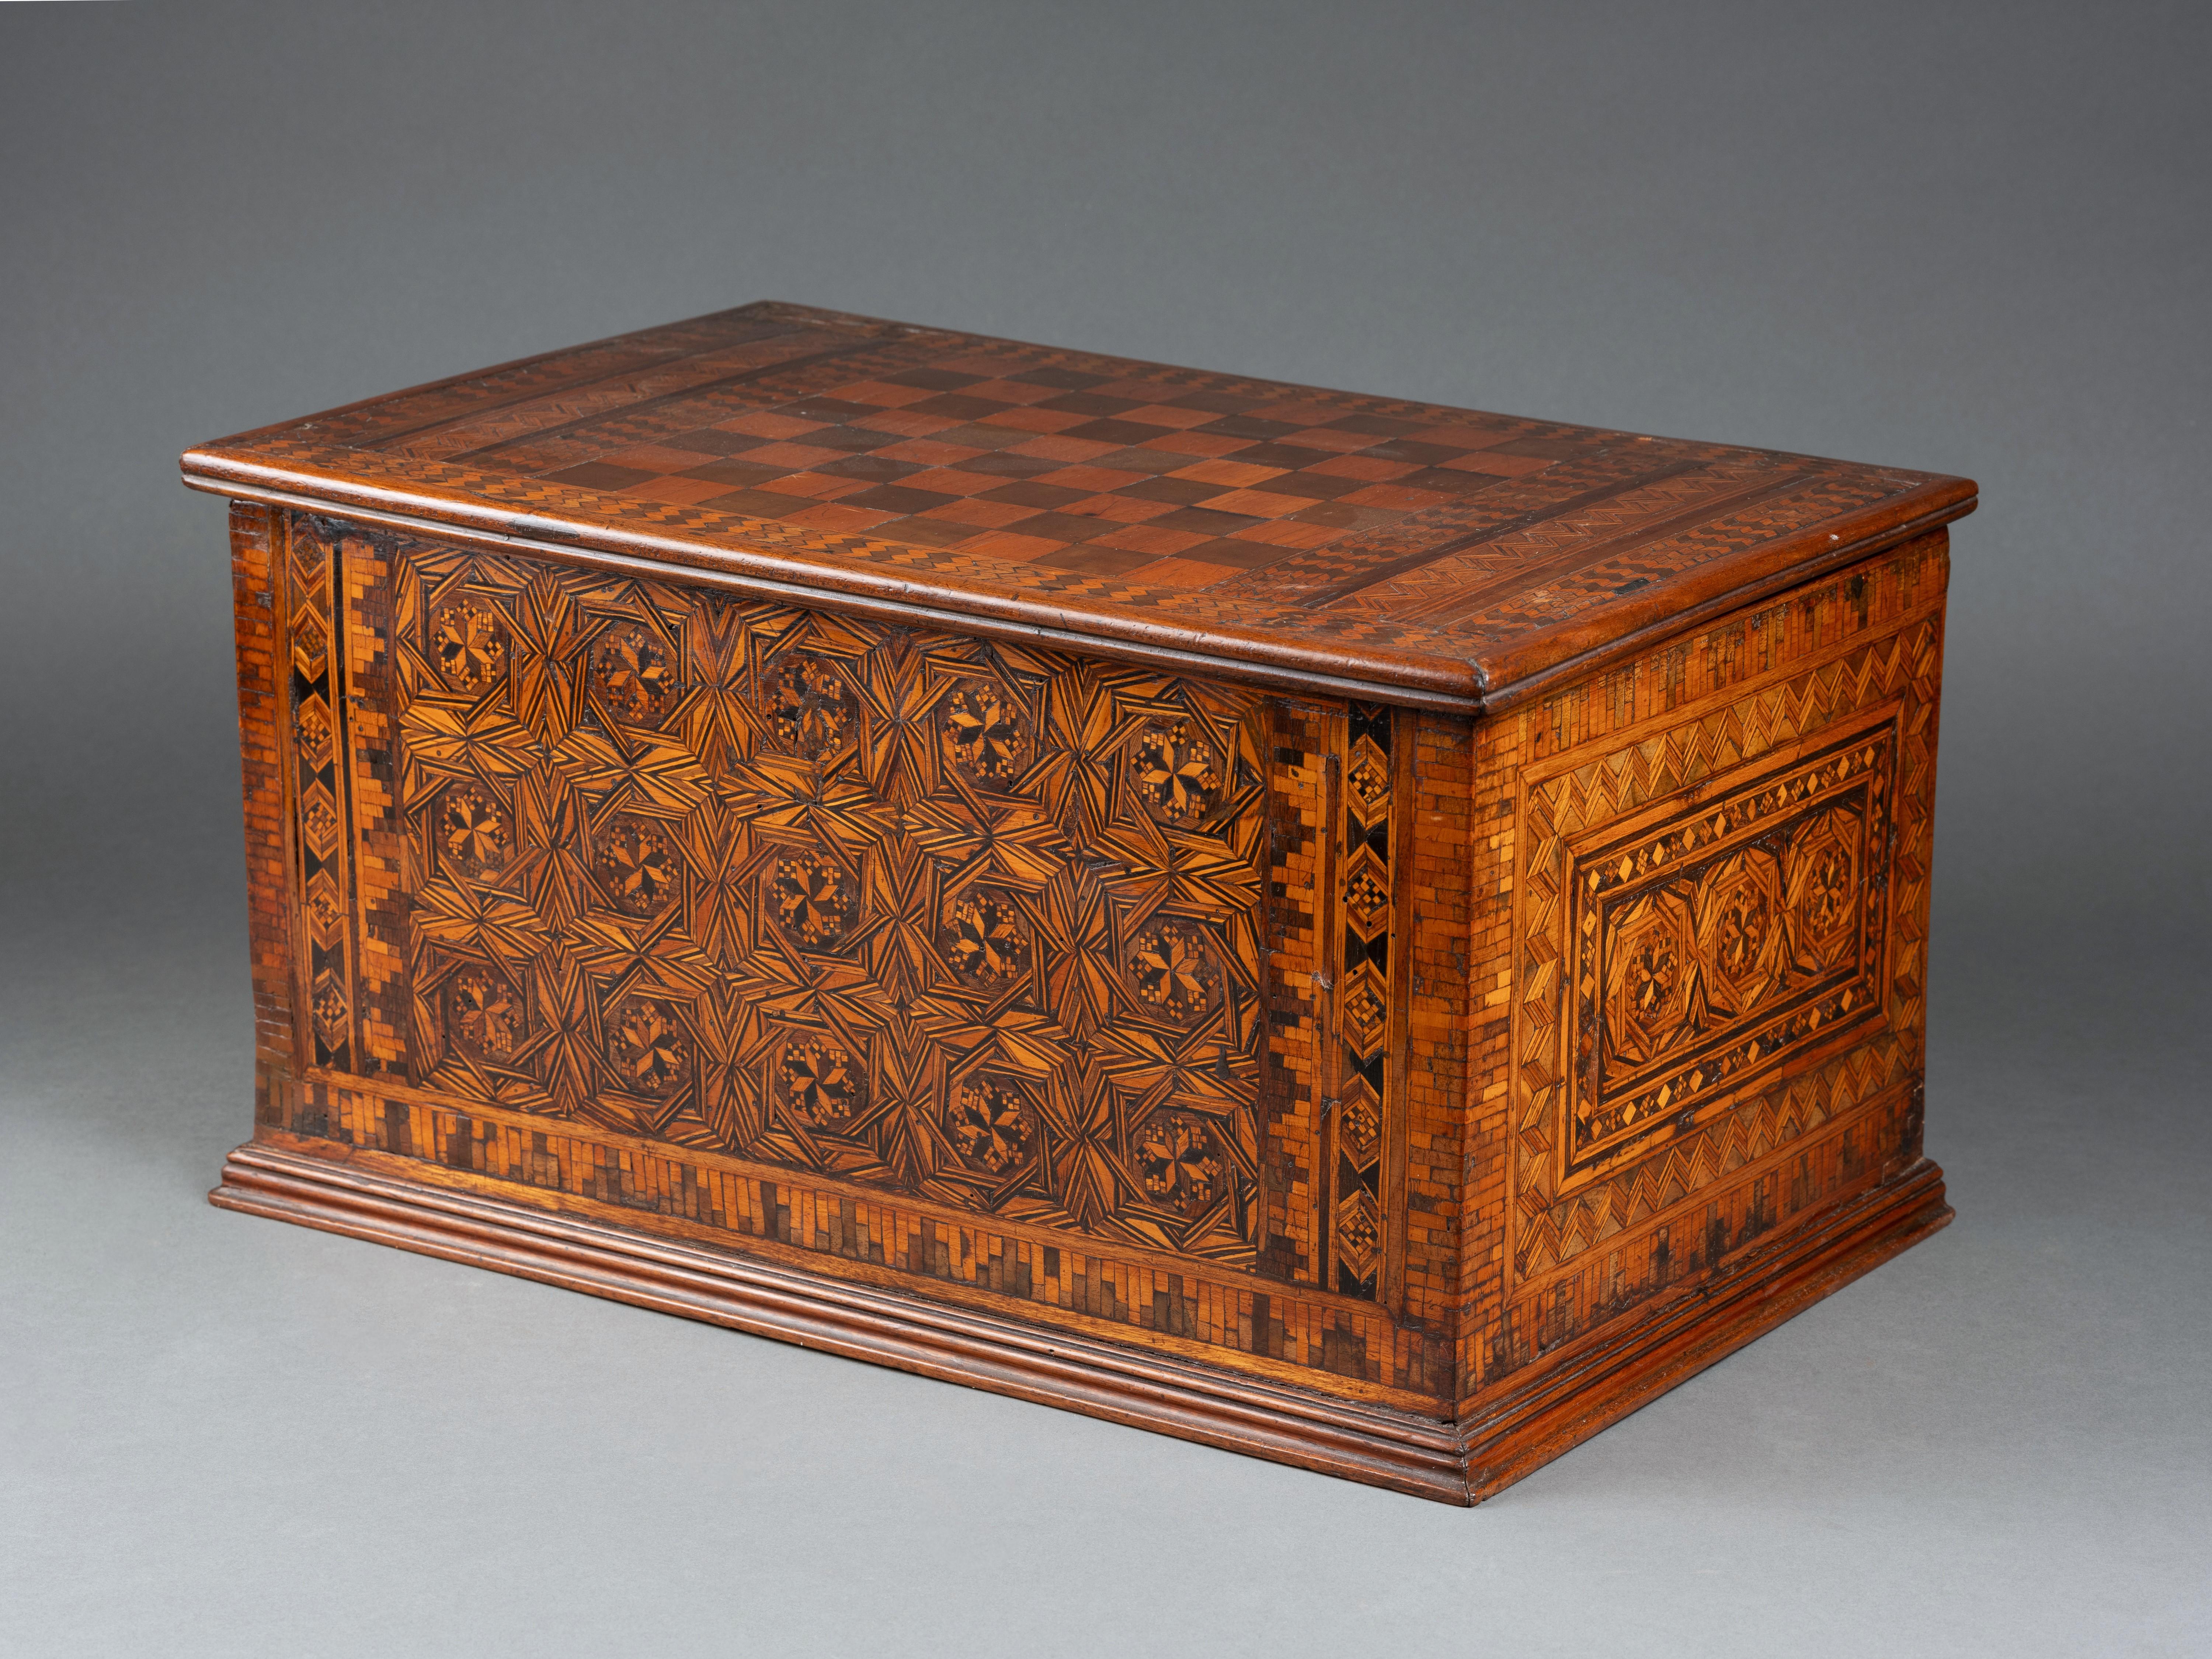 Florence, Italie
Late 15th century
Dimensions: h. 23 cm, w. 45cm, d. 29 cm
Walnut with inlays of different types of stained native wood

Rare writing box with intricate decoration of inlays belonging to a group of furniture and objects executed in